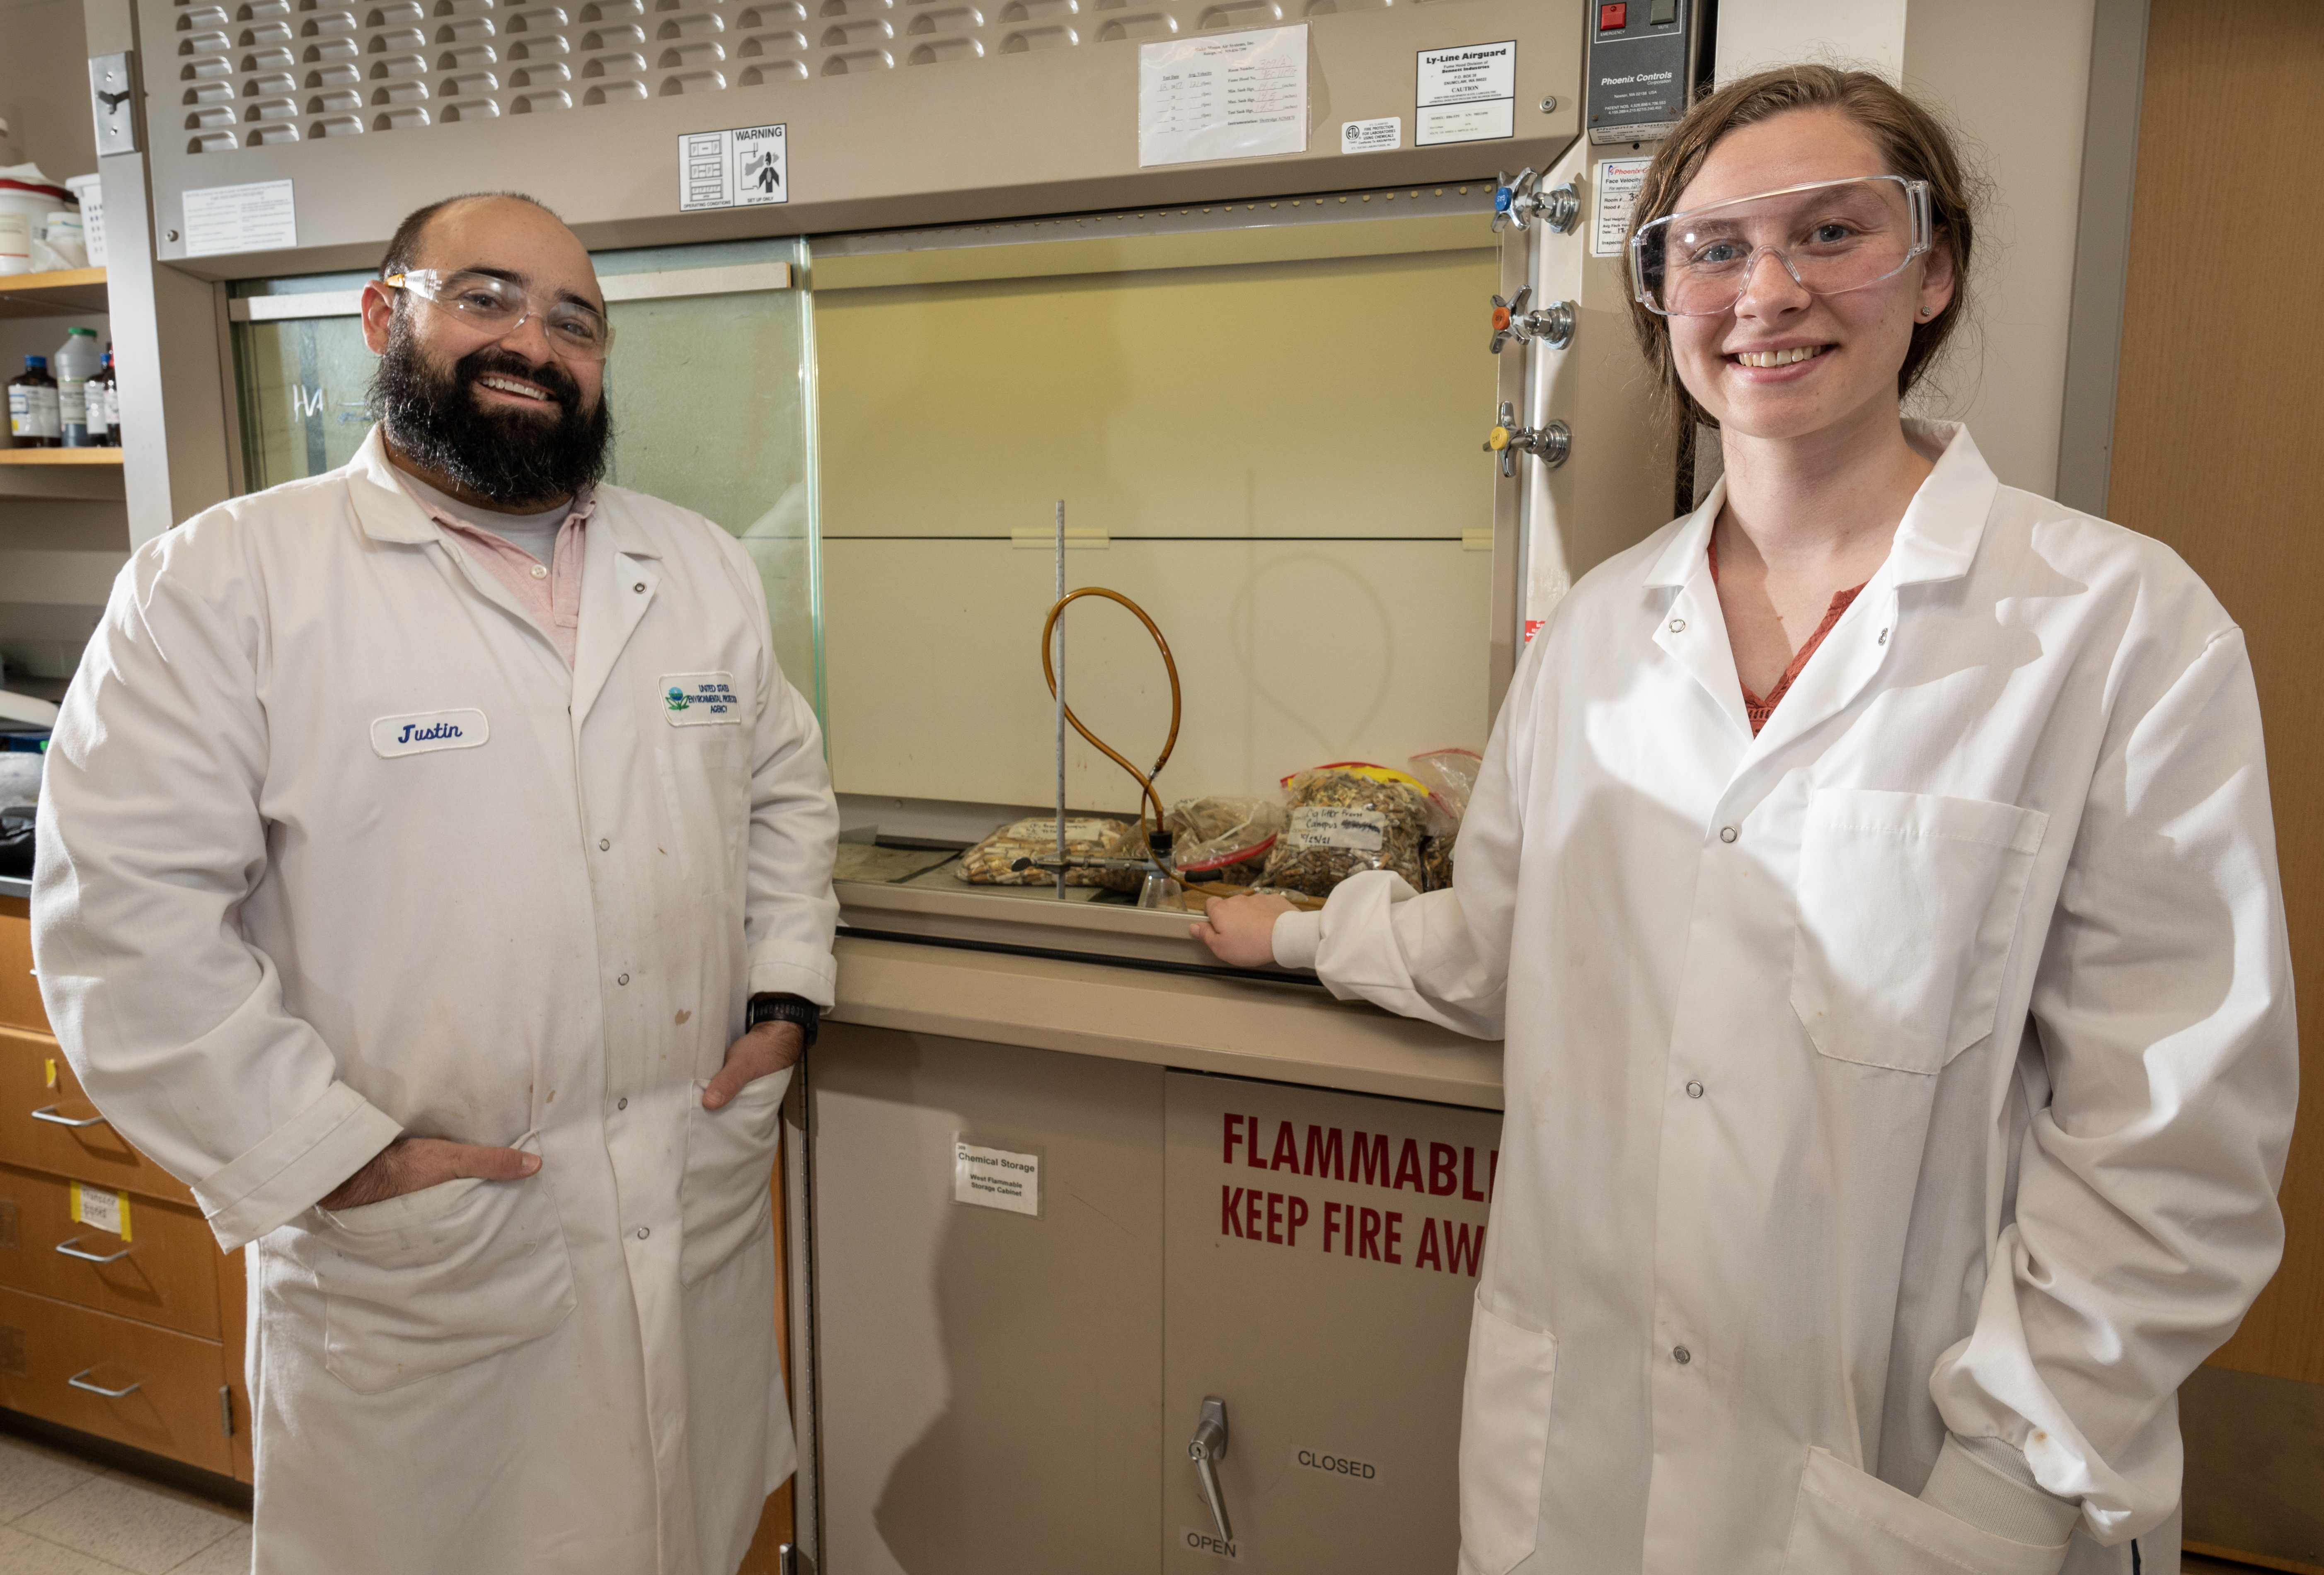 Chemistry professor Justin Clar and Anna Altmann pose for a photo in the lab